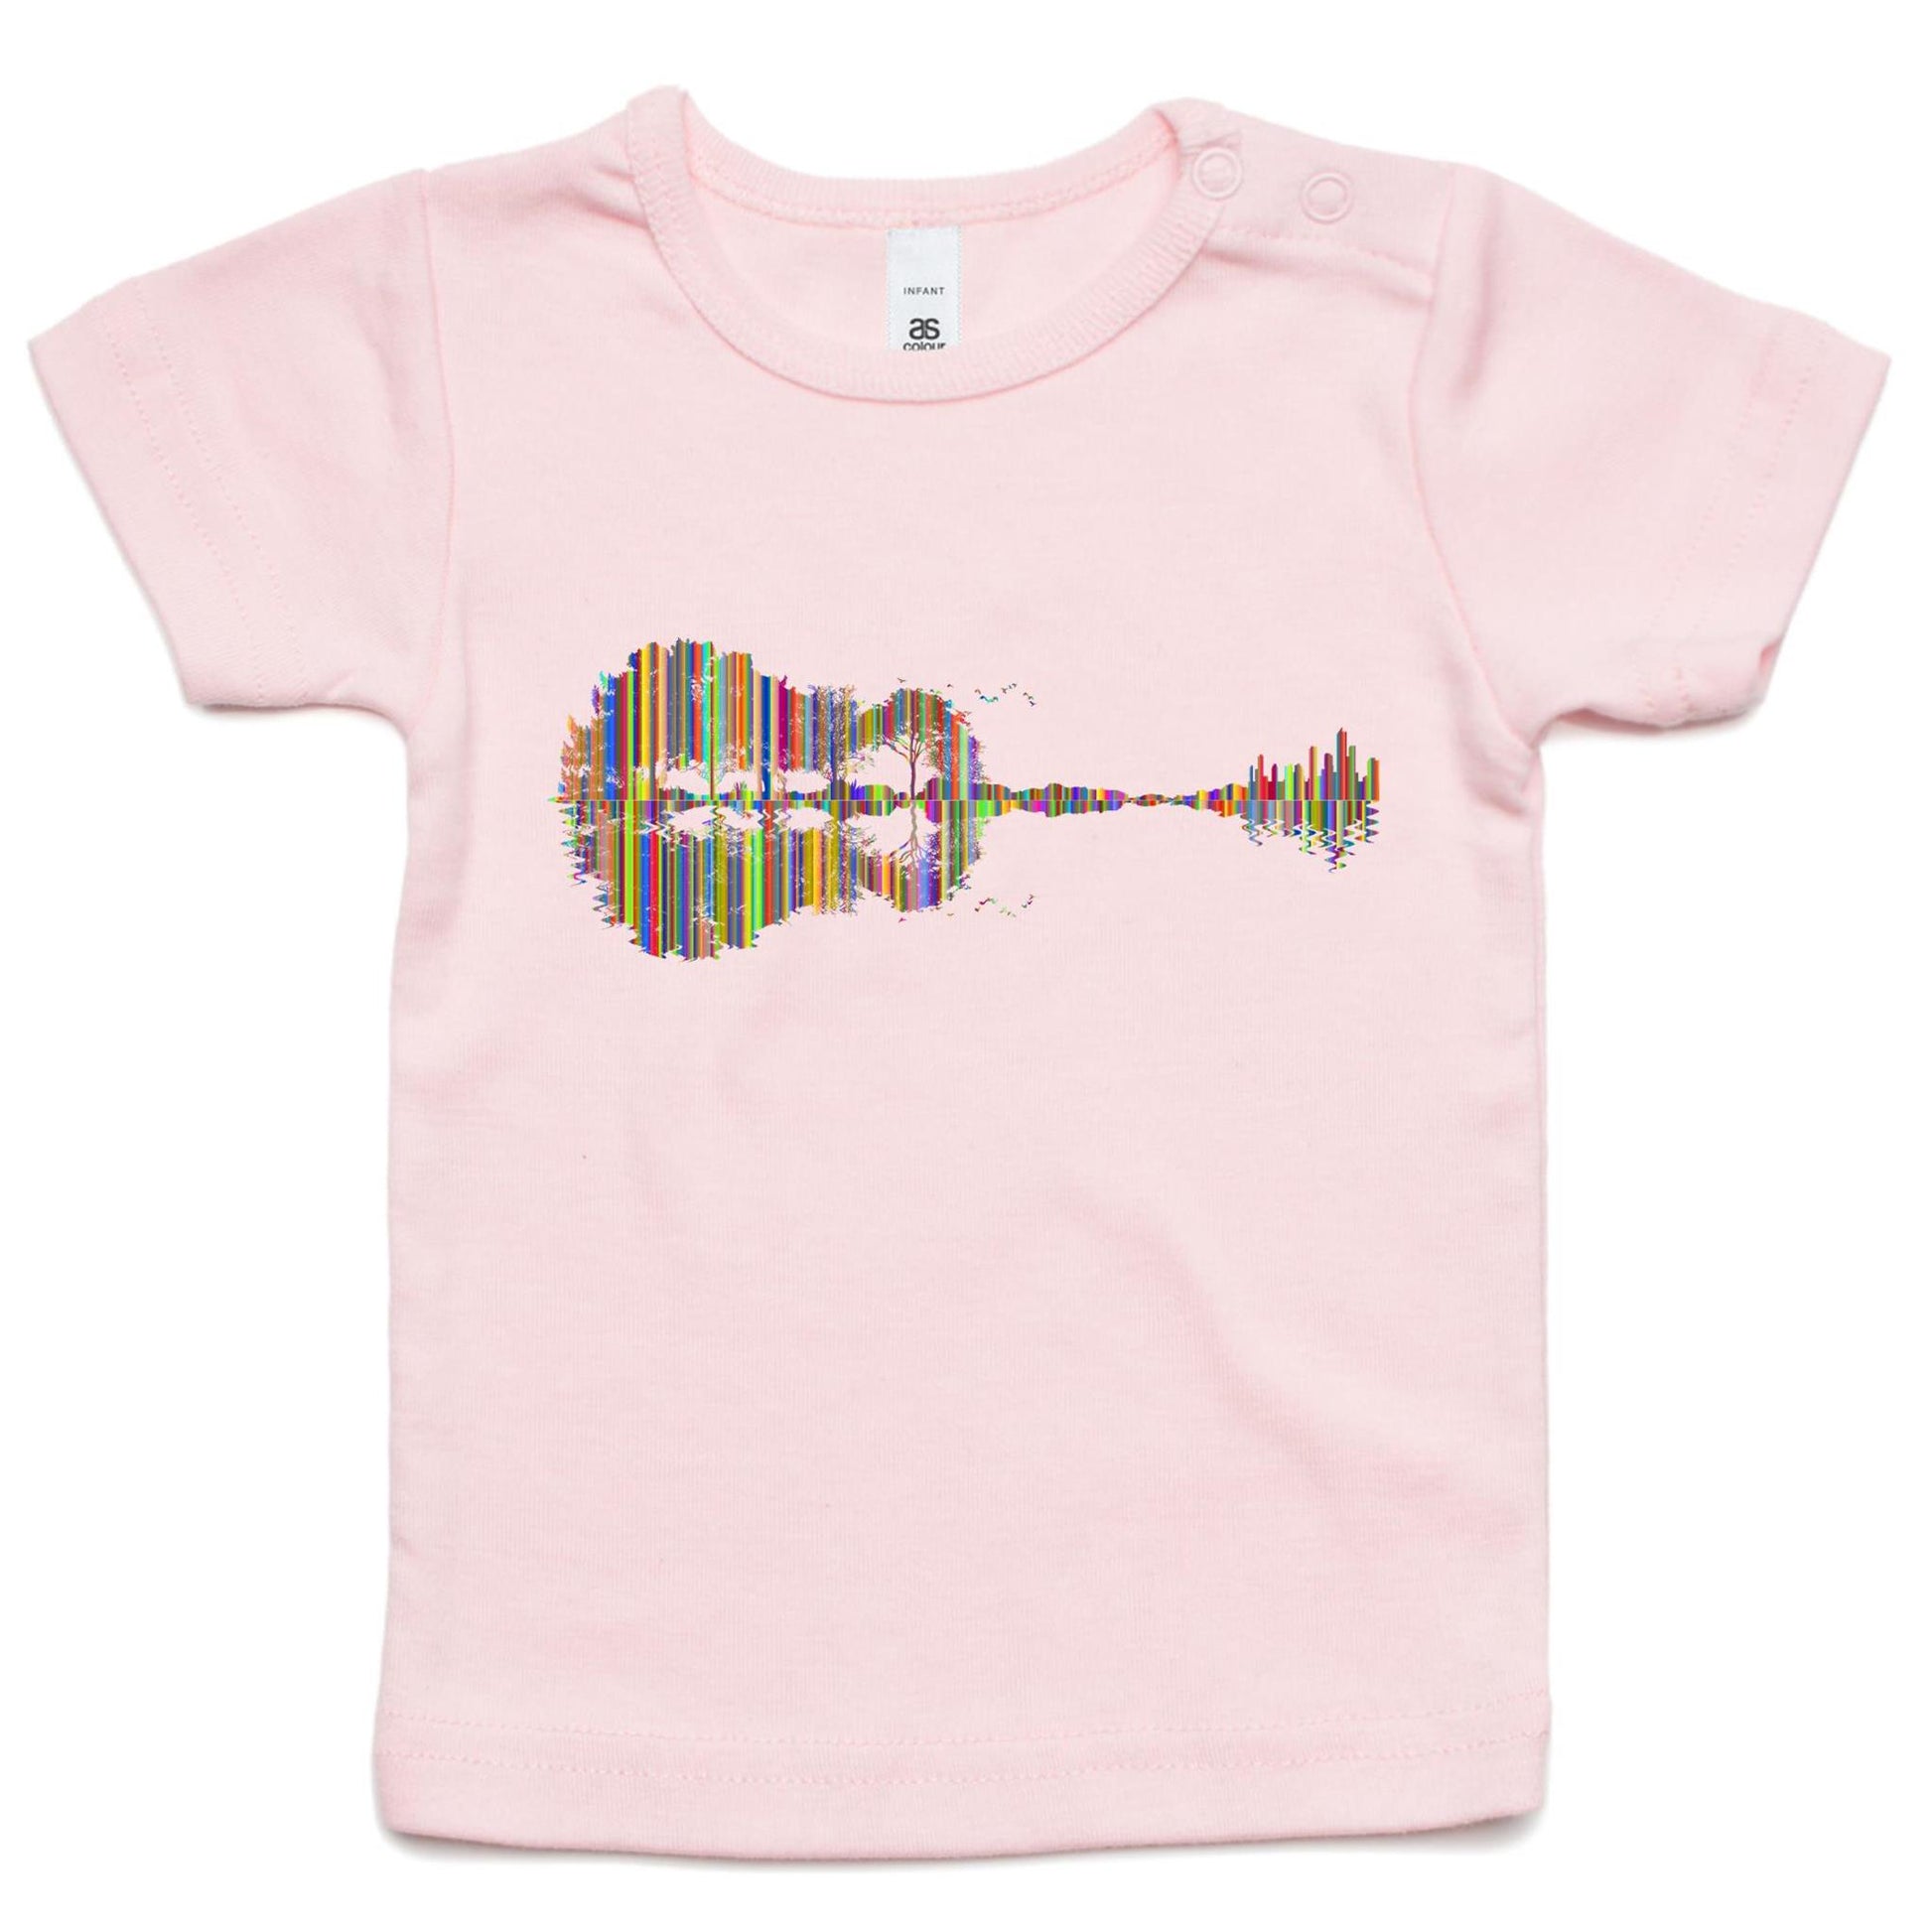 Guitar Reflection In Colour - Baby T-shirt Pink Baby T-shirt Music